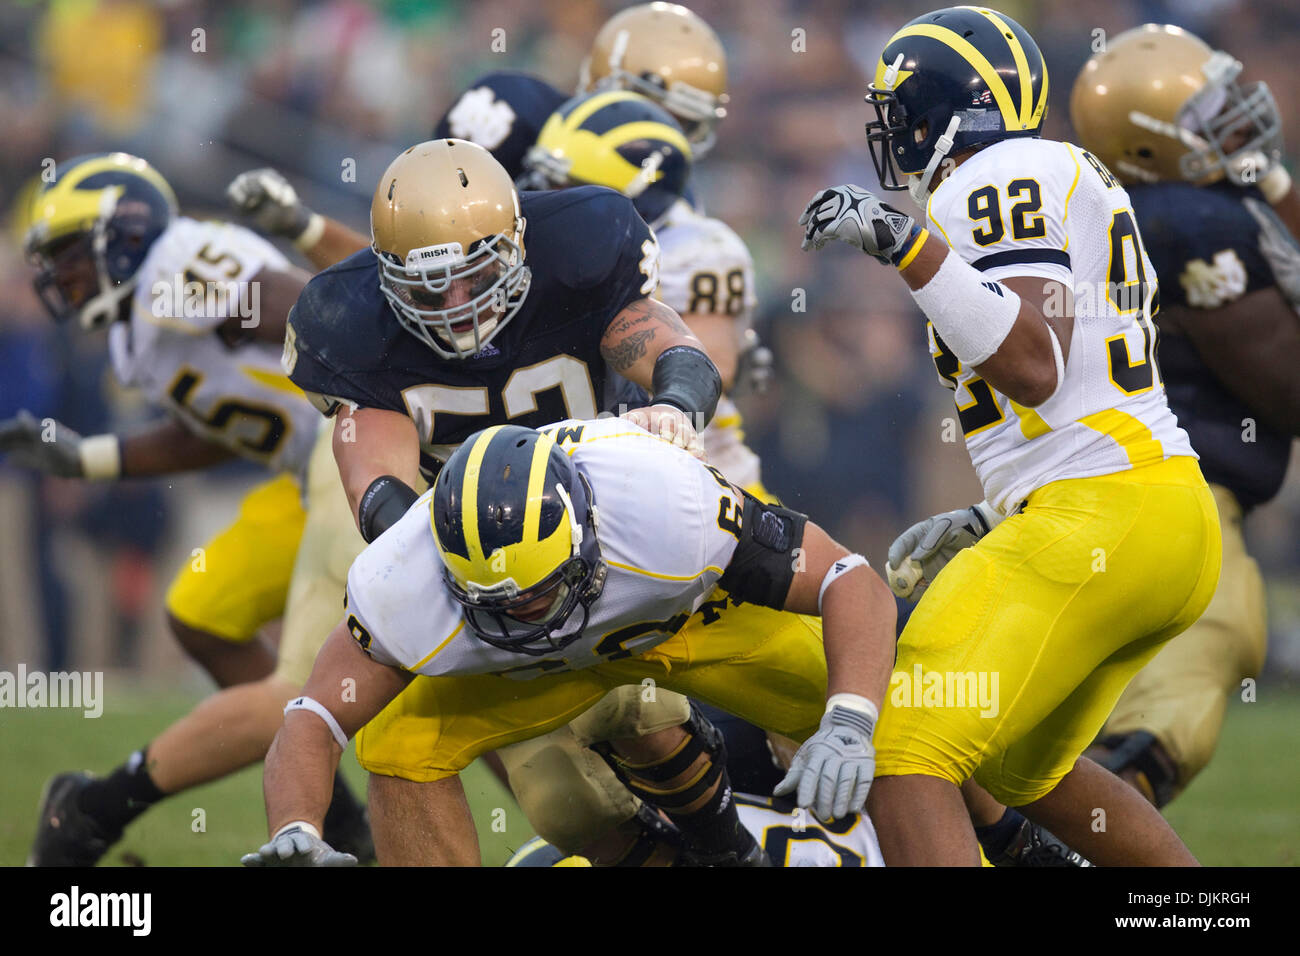 Sept. 11, 2010 - South Bend, Indiana, United States of America - Notre Dame center Braxston Cave (#52) blocks Michigan defensive tackle Alex Schwab (#68) during NCAA football game between the Notre Dame Fighting Irish and the Michigan Wolverines.  Michigan defeated Notre Dame 28-24 in game at Notre Dame Stadium in South Bend, Indiana. (Credit Image: © John Mersits/Southcreek Global Stock Photo